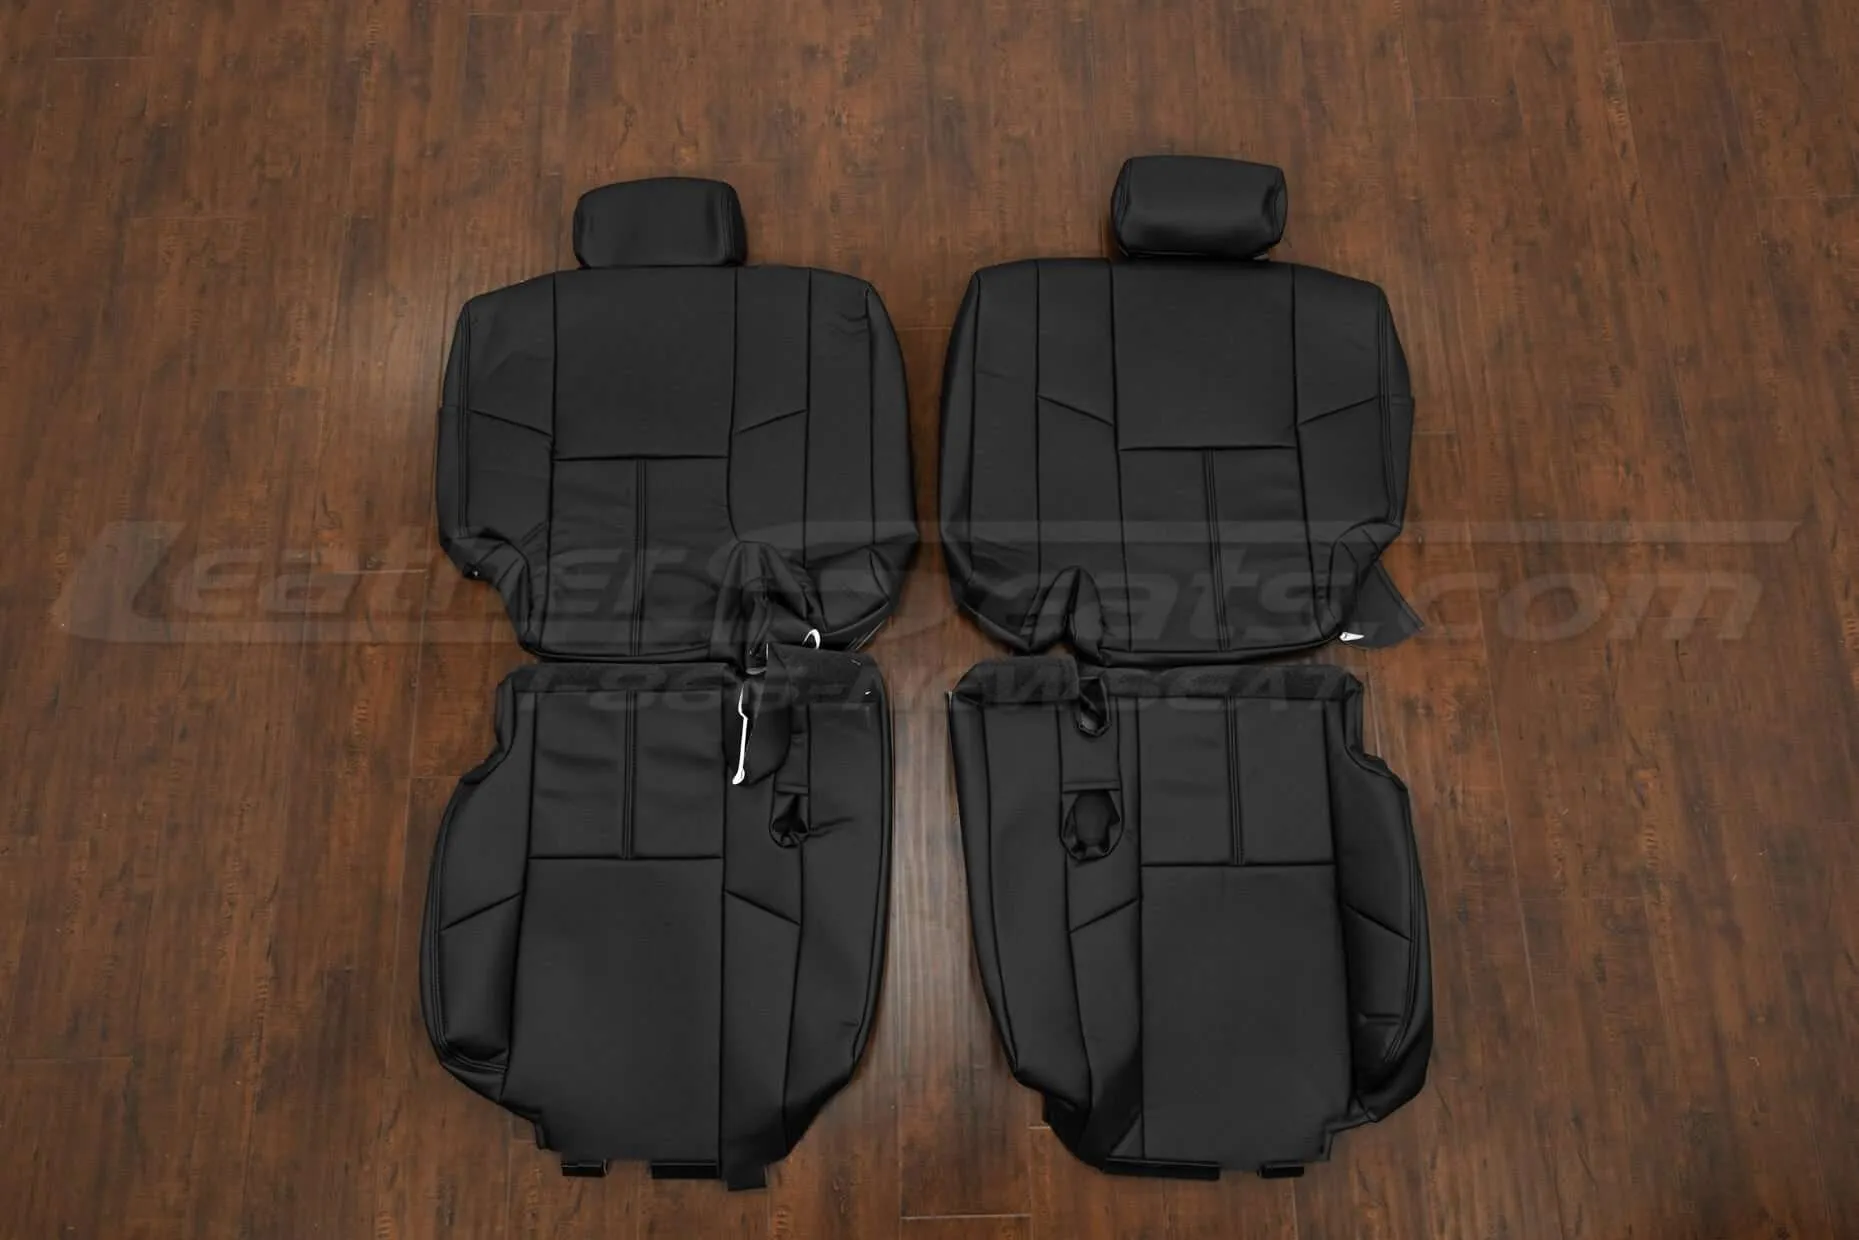 Cadillac Escalade Leather Seat Kit - Black - third row upholstery